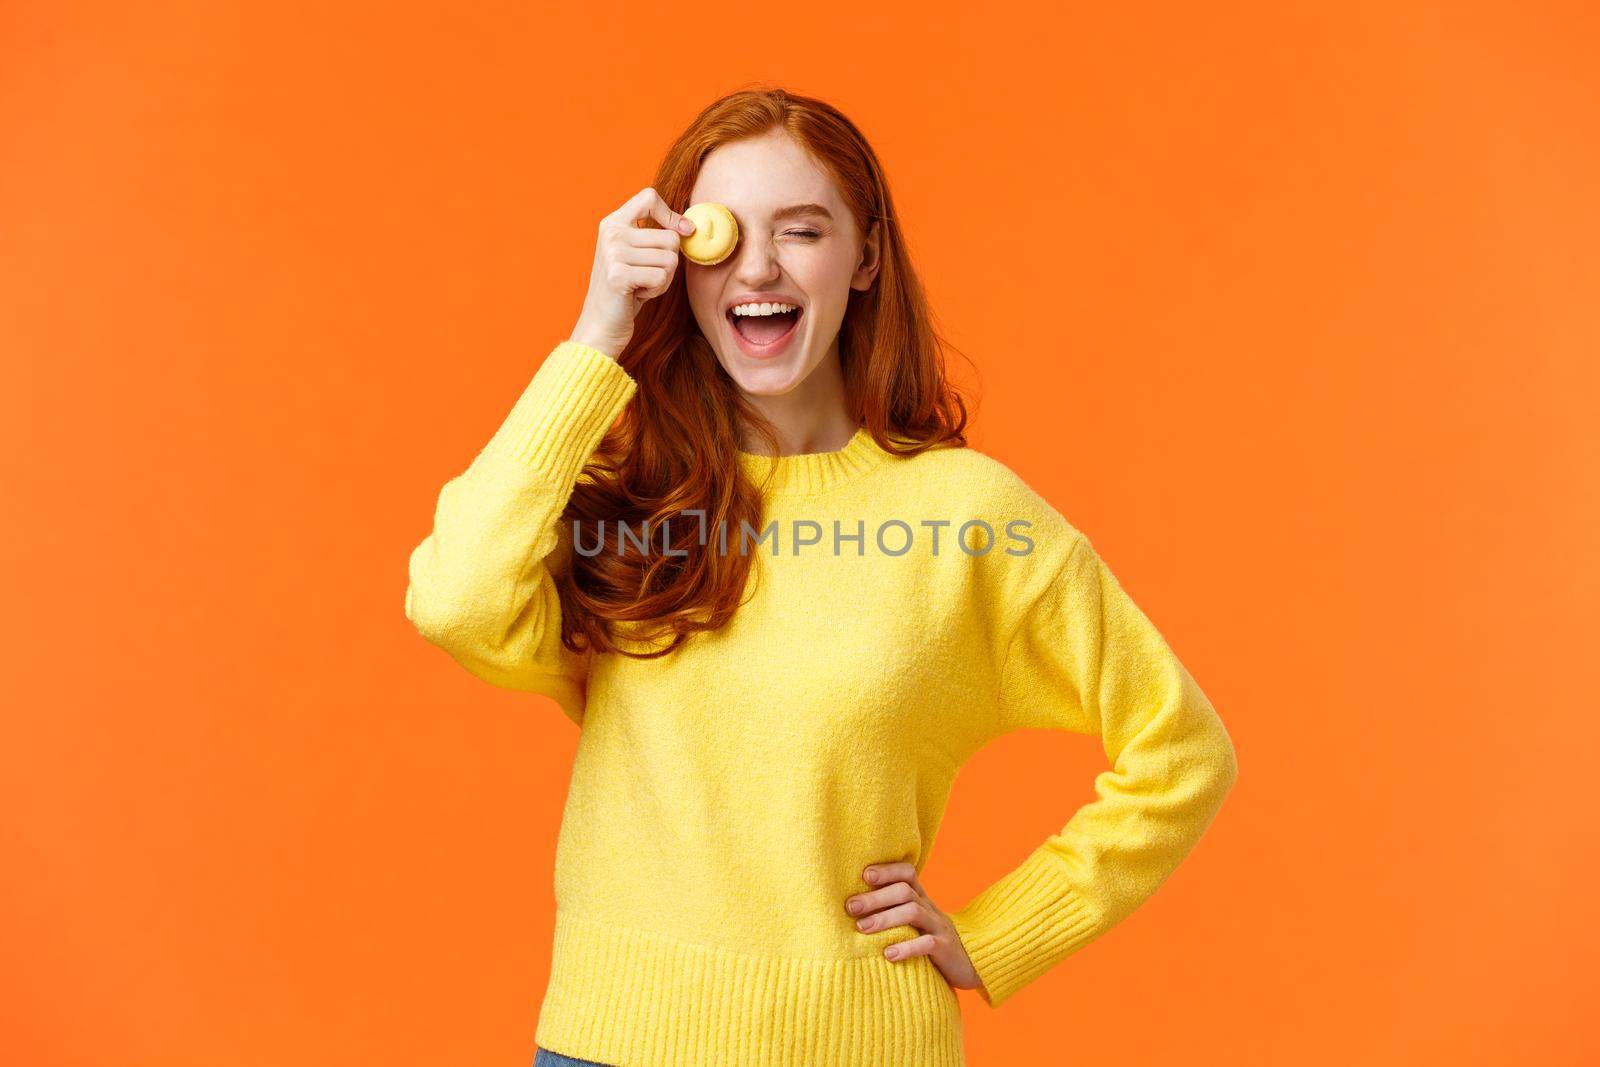 Happy and carefree smiling, laughing lovely redhead girl grinning, holding tasty macaron near eye, fooling around, having fun, eating delicious dessert at favorite cafe, orange background.